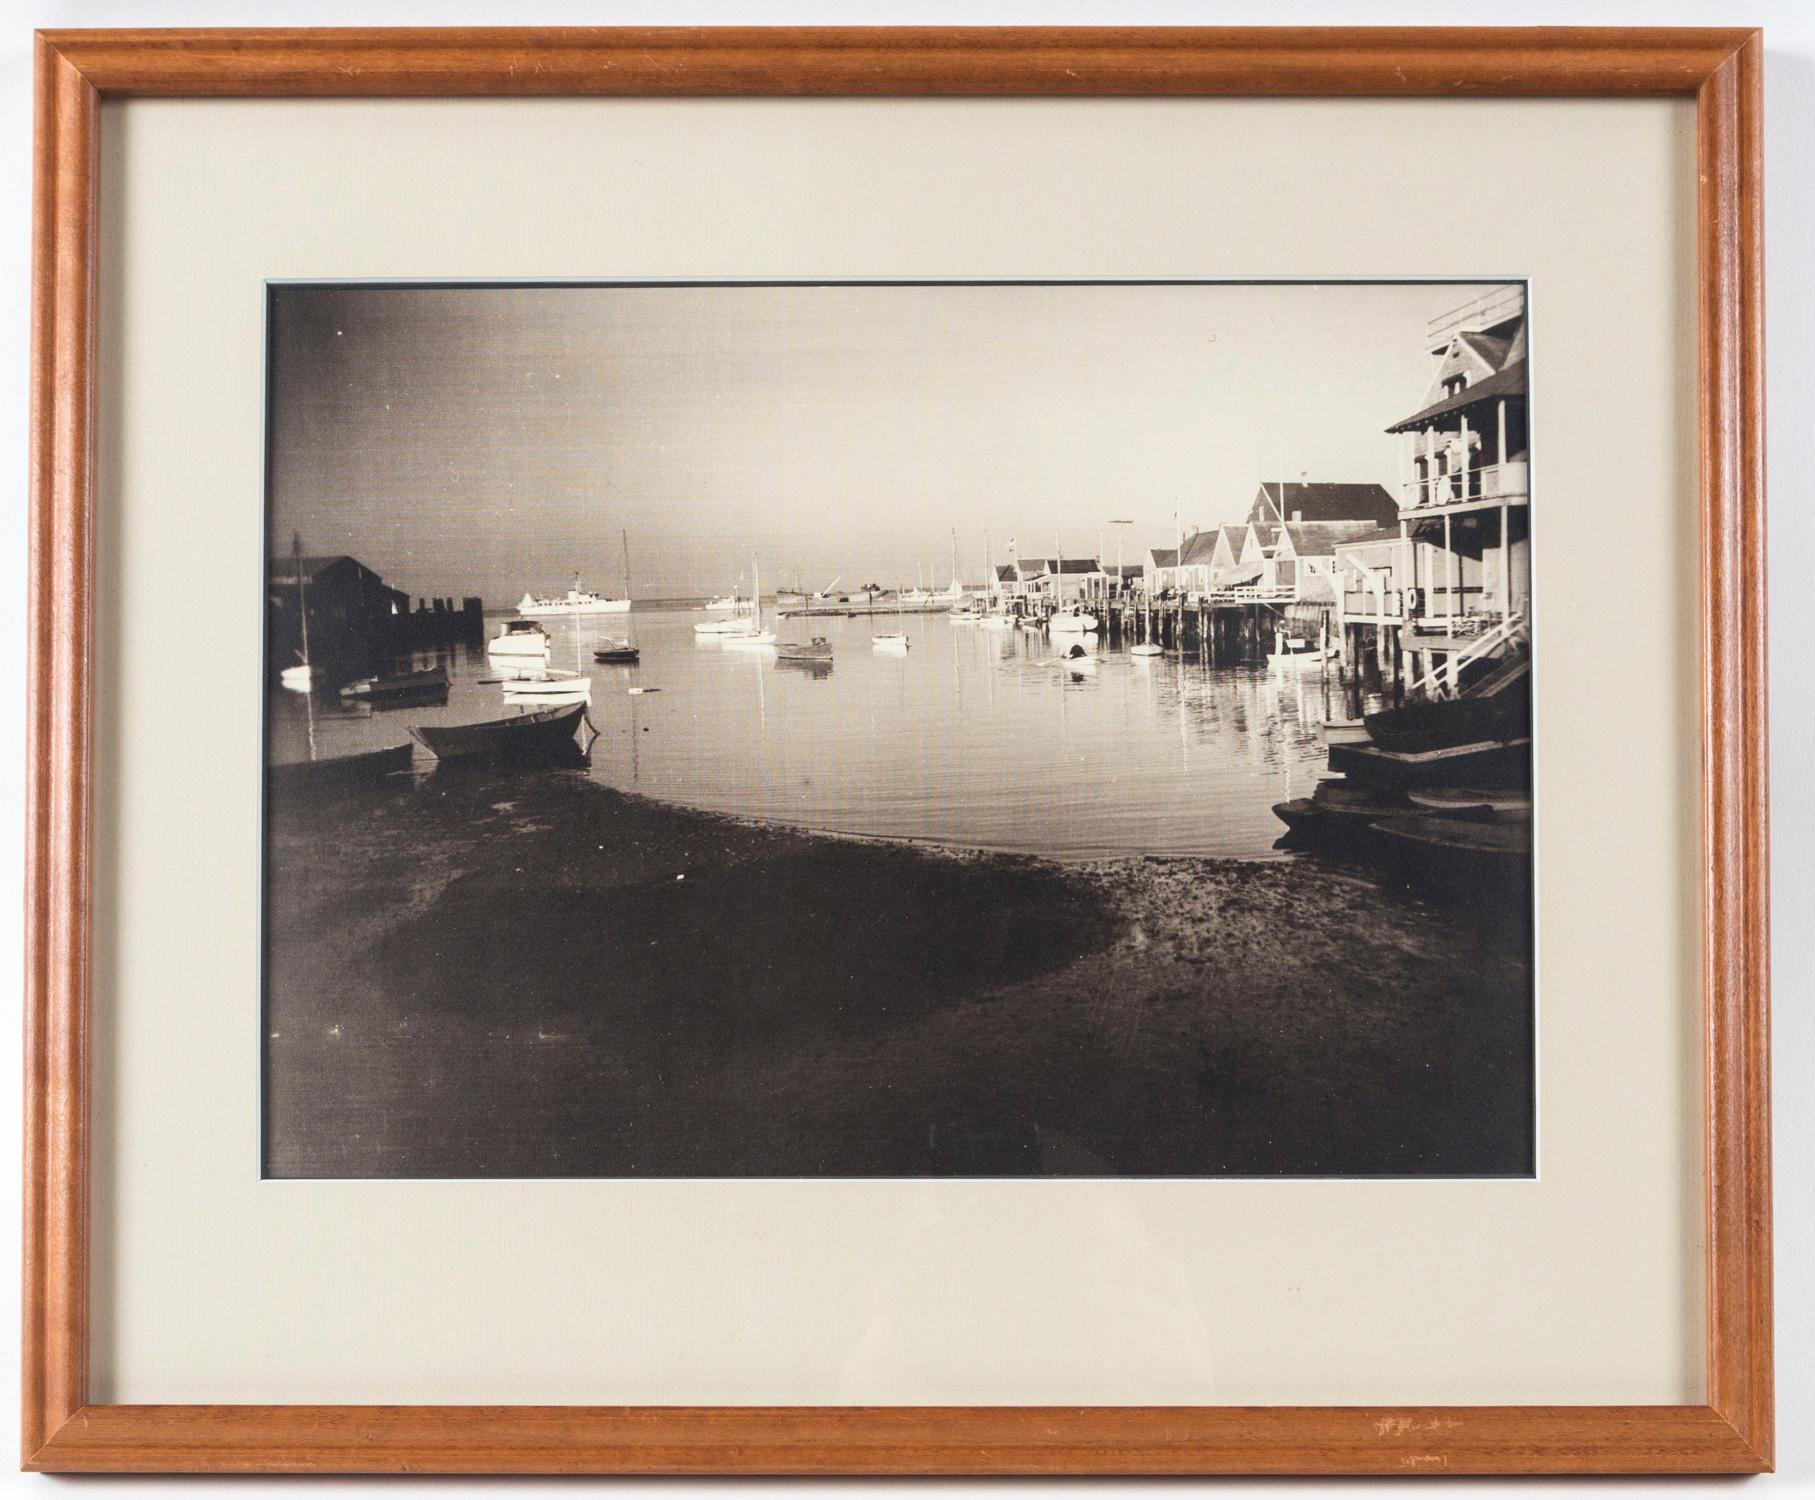 Vintage Black and White Photograph, Nantucket Harbor, circa 1935. James F. Barker (1871-1950) was an artist and photographer with generational history on Nantucket. He maintained a studio/gallery on Nantucket, Eagle's Wing.